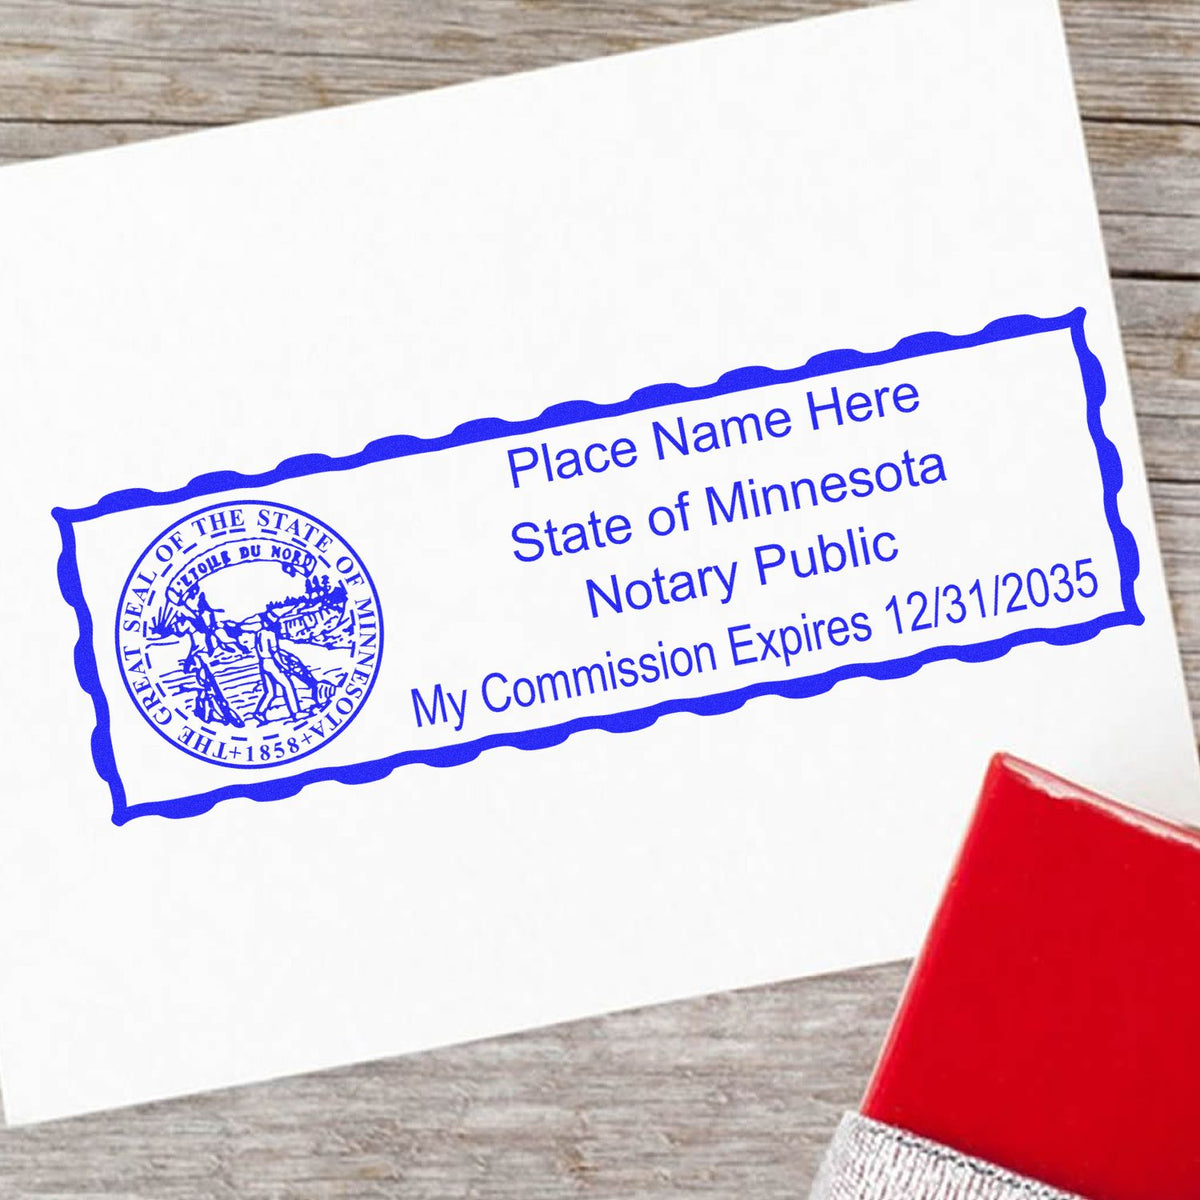 This paper is stamped with a sample imprint of the Slim Pre-Inked State Seal Notary Stamp for Minnesota, signifying its quality and reliability.